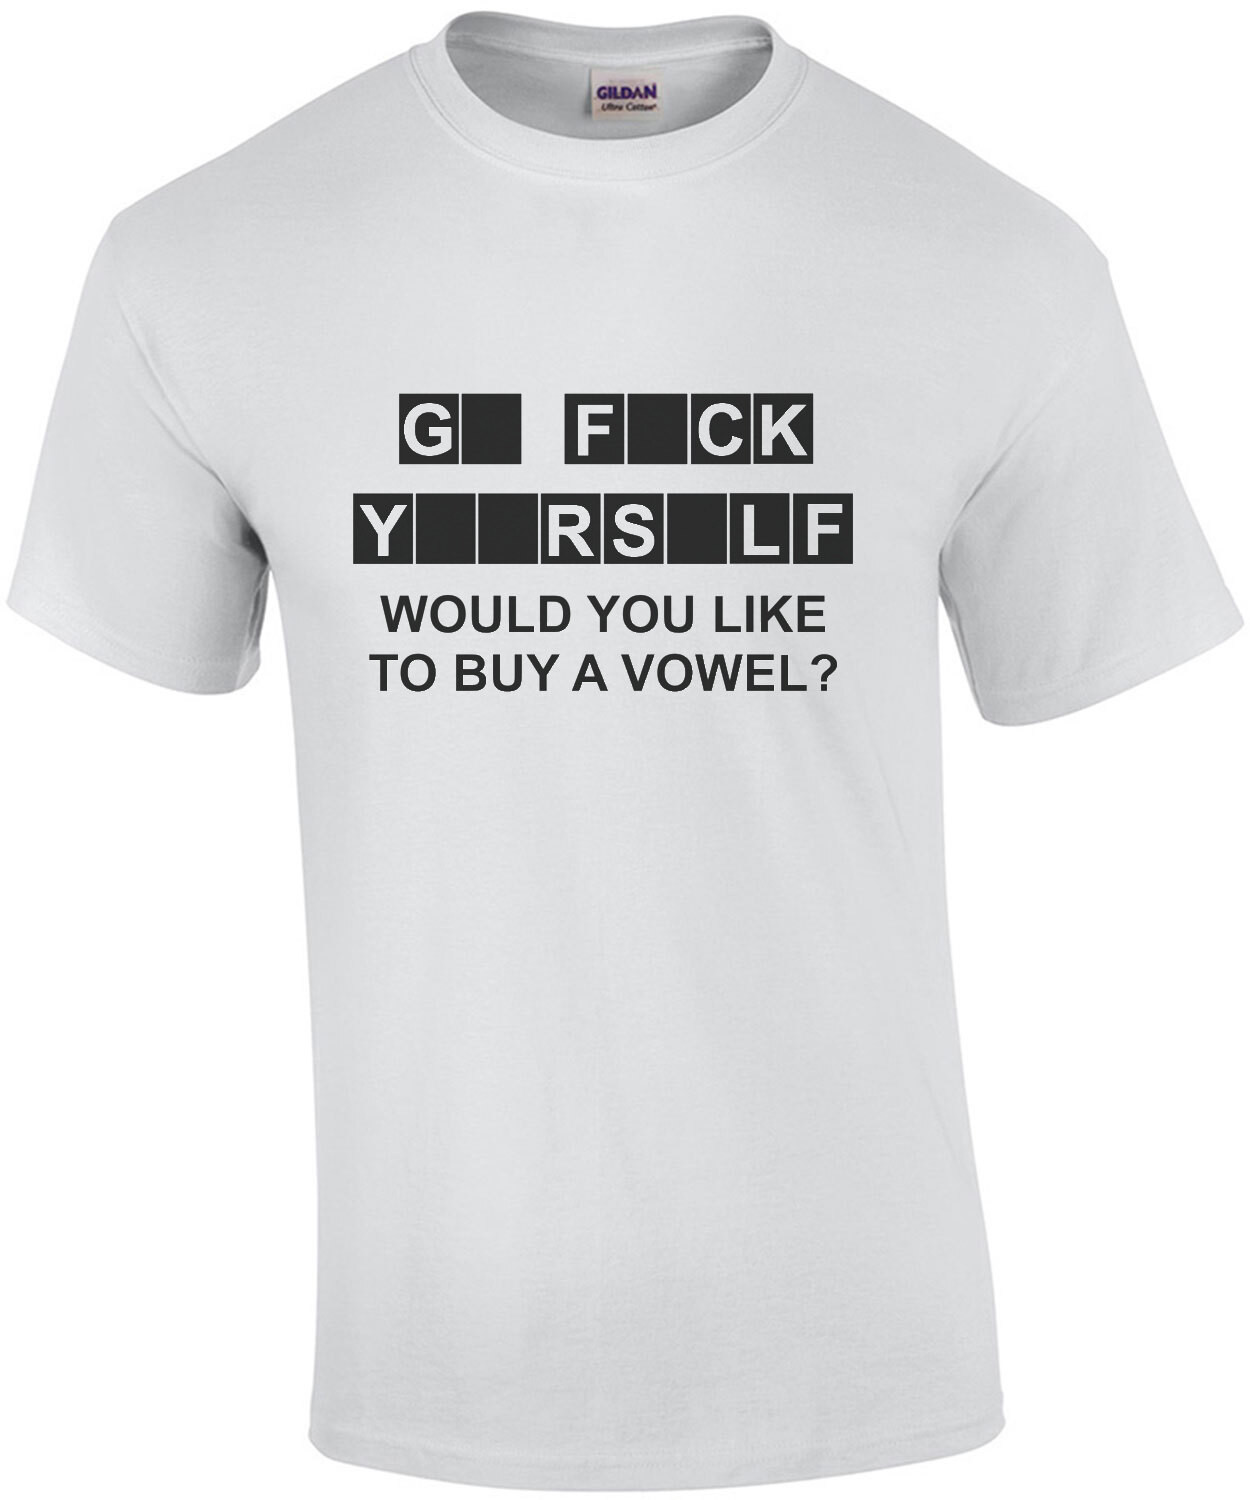 Go Fuck Yourself - Would you like to buy a vowel? Funny rude and offensive t-shirt.